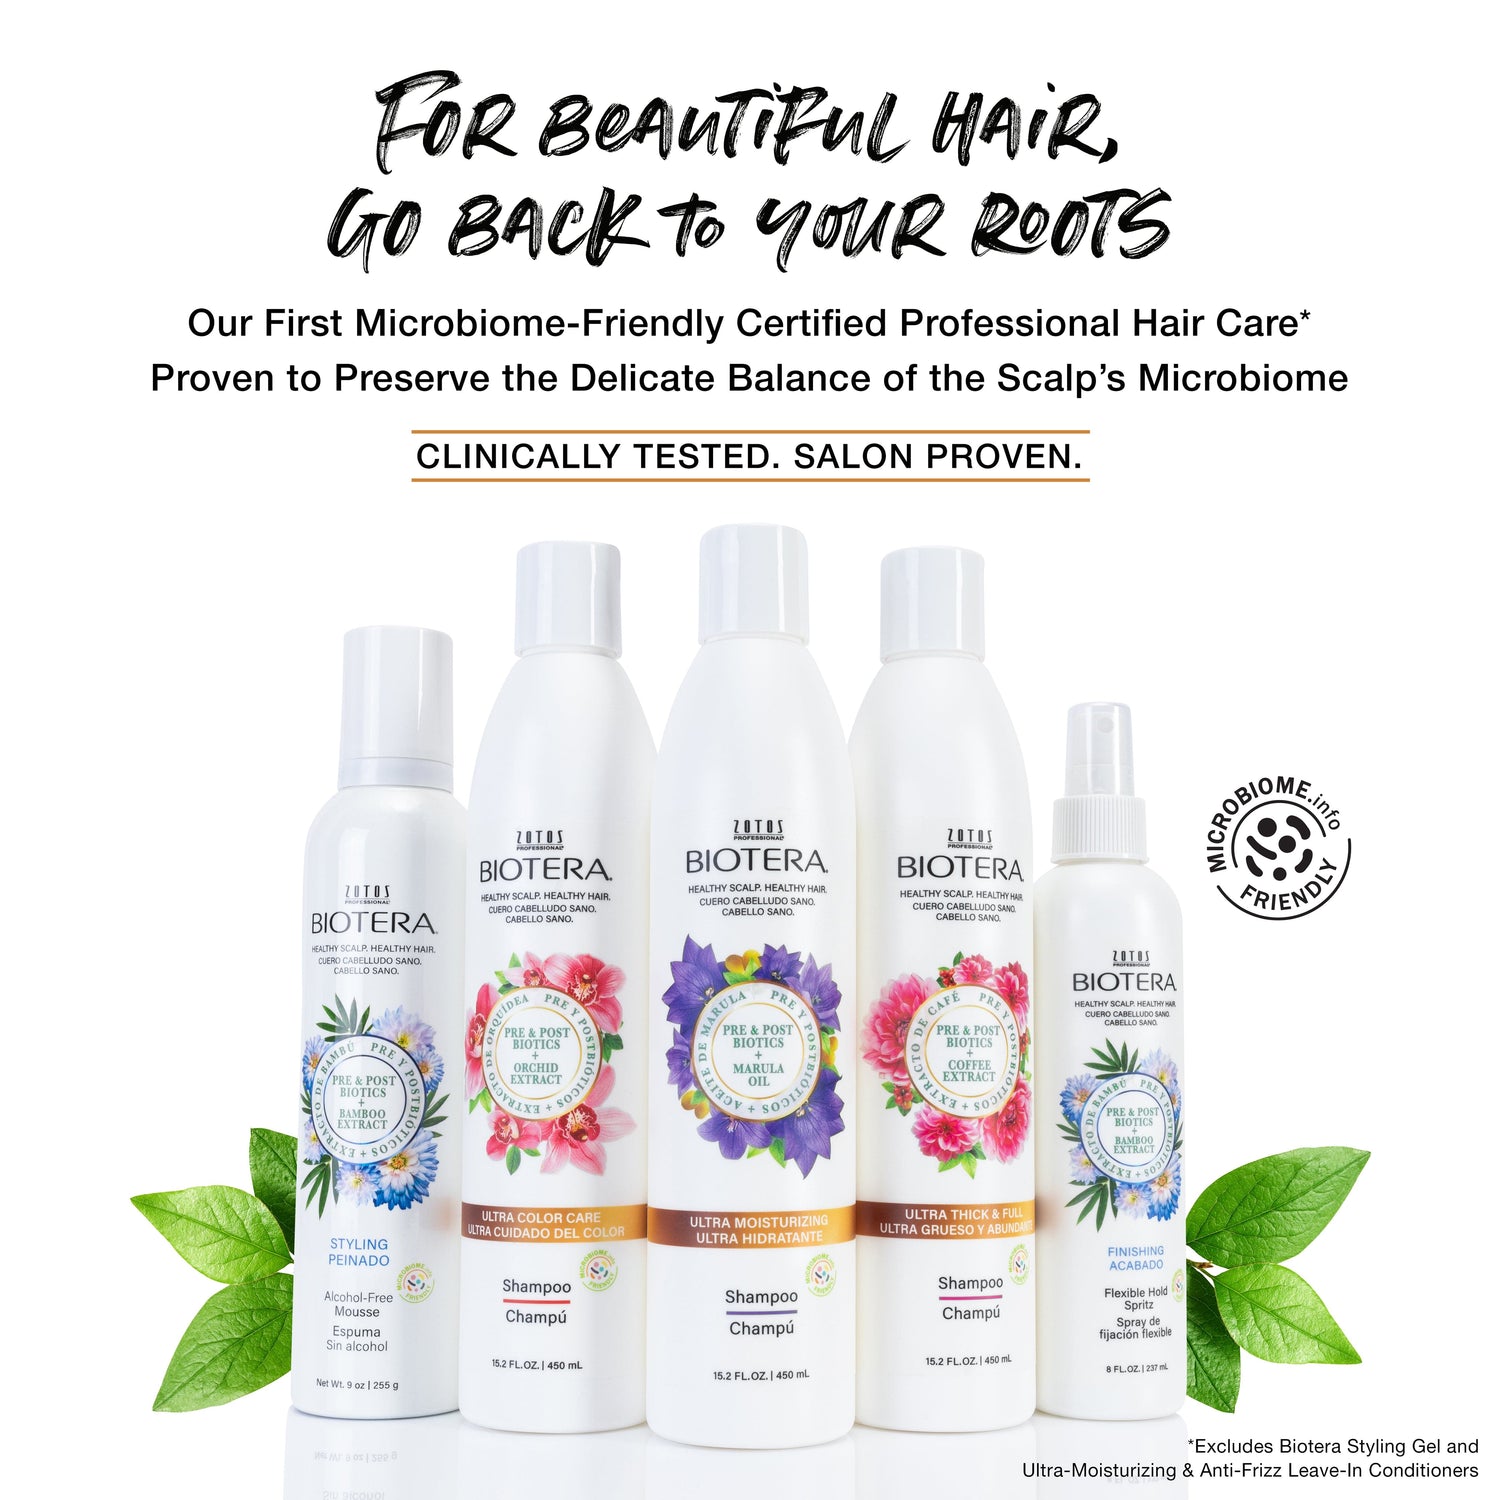 For beautiful hair, go back to your roots. Biotera is our first microbiome-friendly certified professional hair care proven to preserve the delicate balance of the scalp's microbiome. Clinically tested, salon proven. Image of shampoos, conditioners and stylers. 